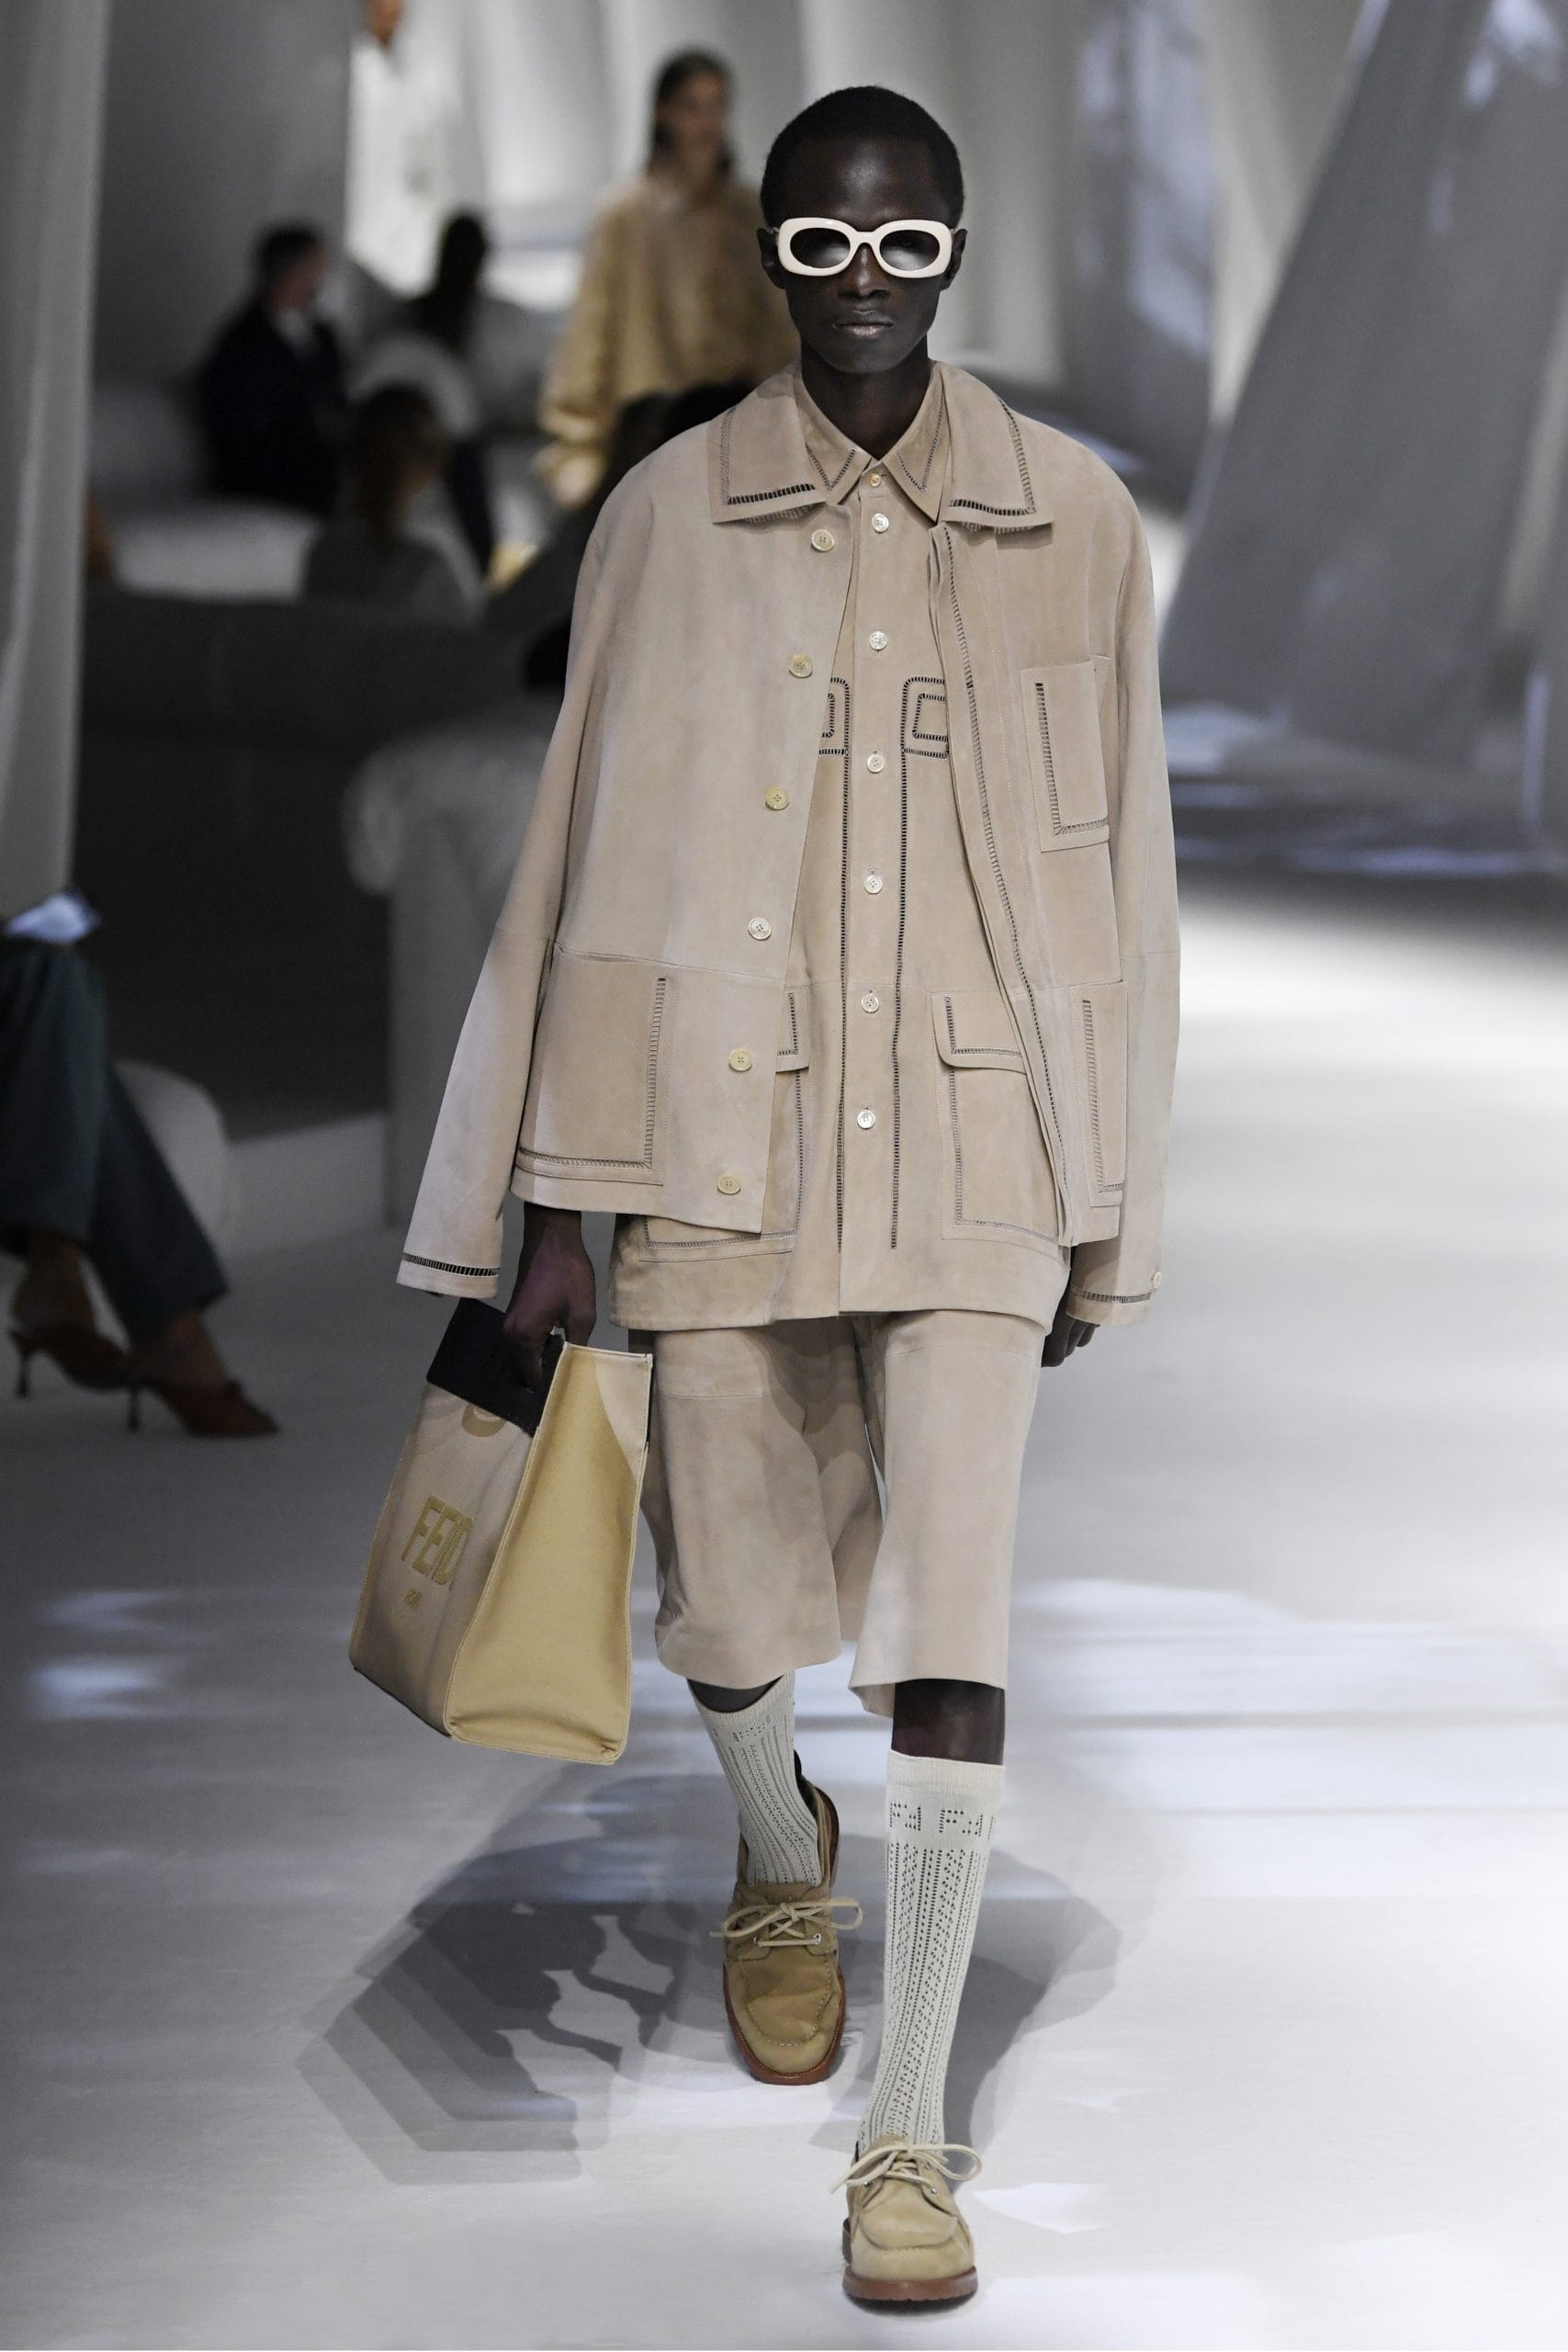 The Fendi Spring Summer 2021 Collection Keeps It in The Family - Men's